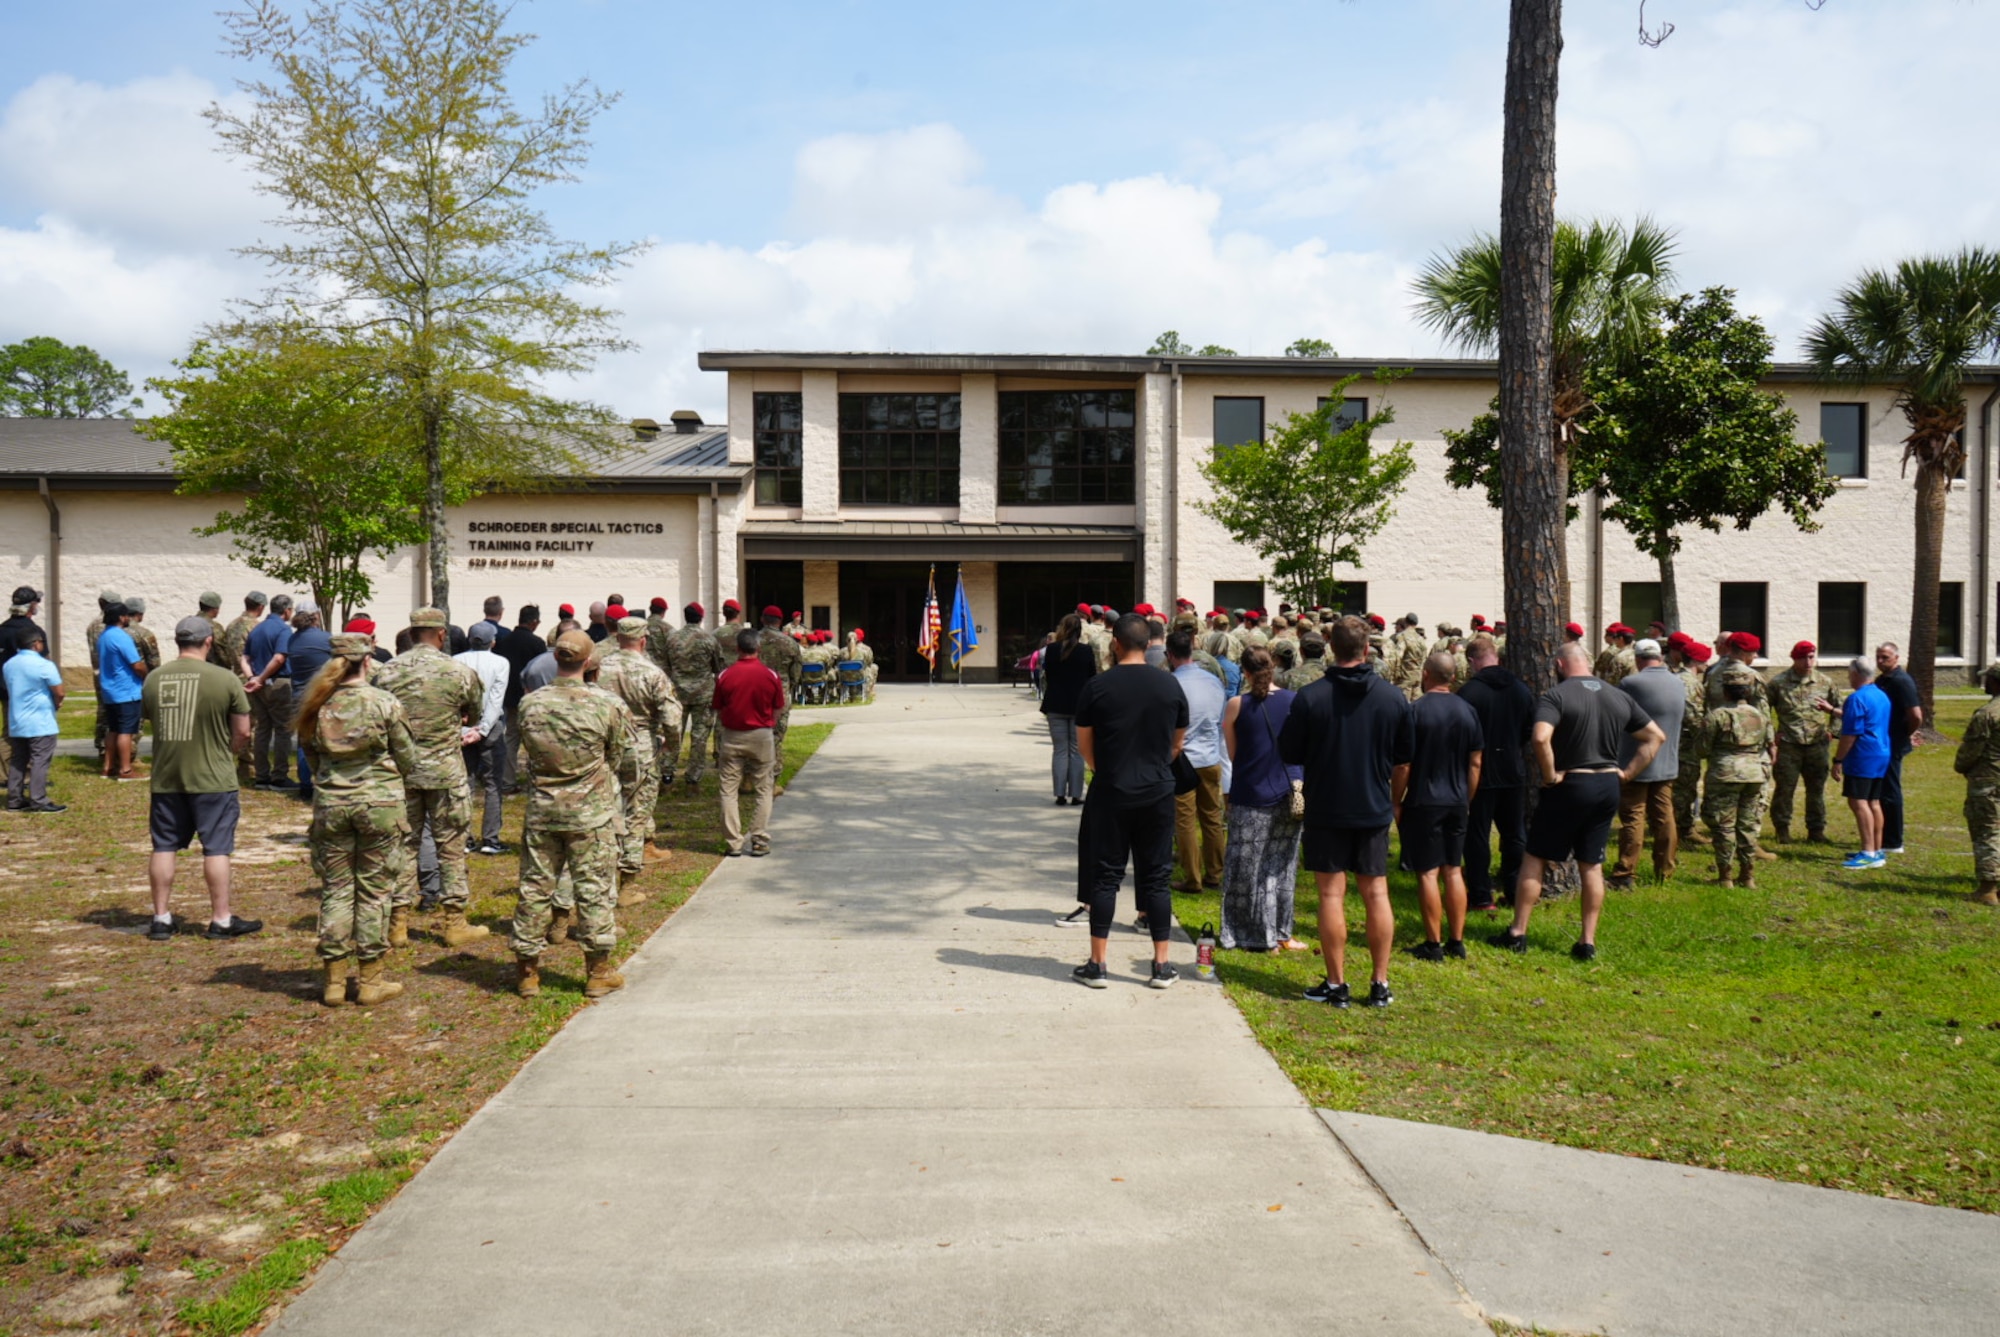 A dedication ceremony was held in honor of SrA Danny Sanchez, who was killed-in-action in Afghanistan on Sept. 16, 2010, at the Special Tactics Training Squadron. (U.S. Air Force Photo by Capt. Savannah Stephens)